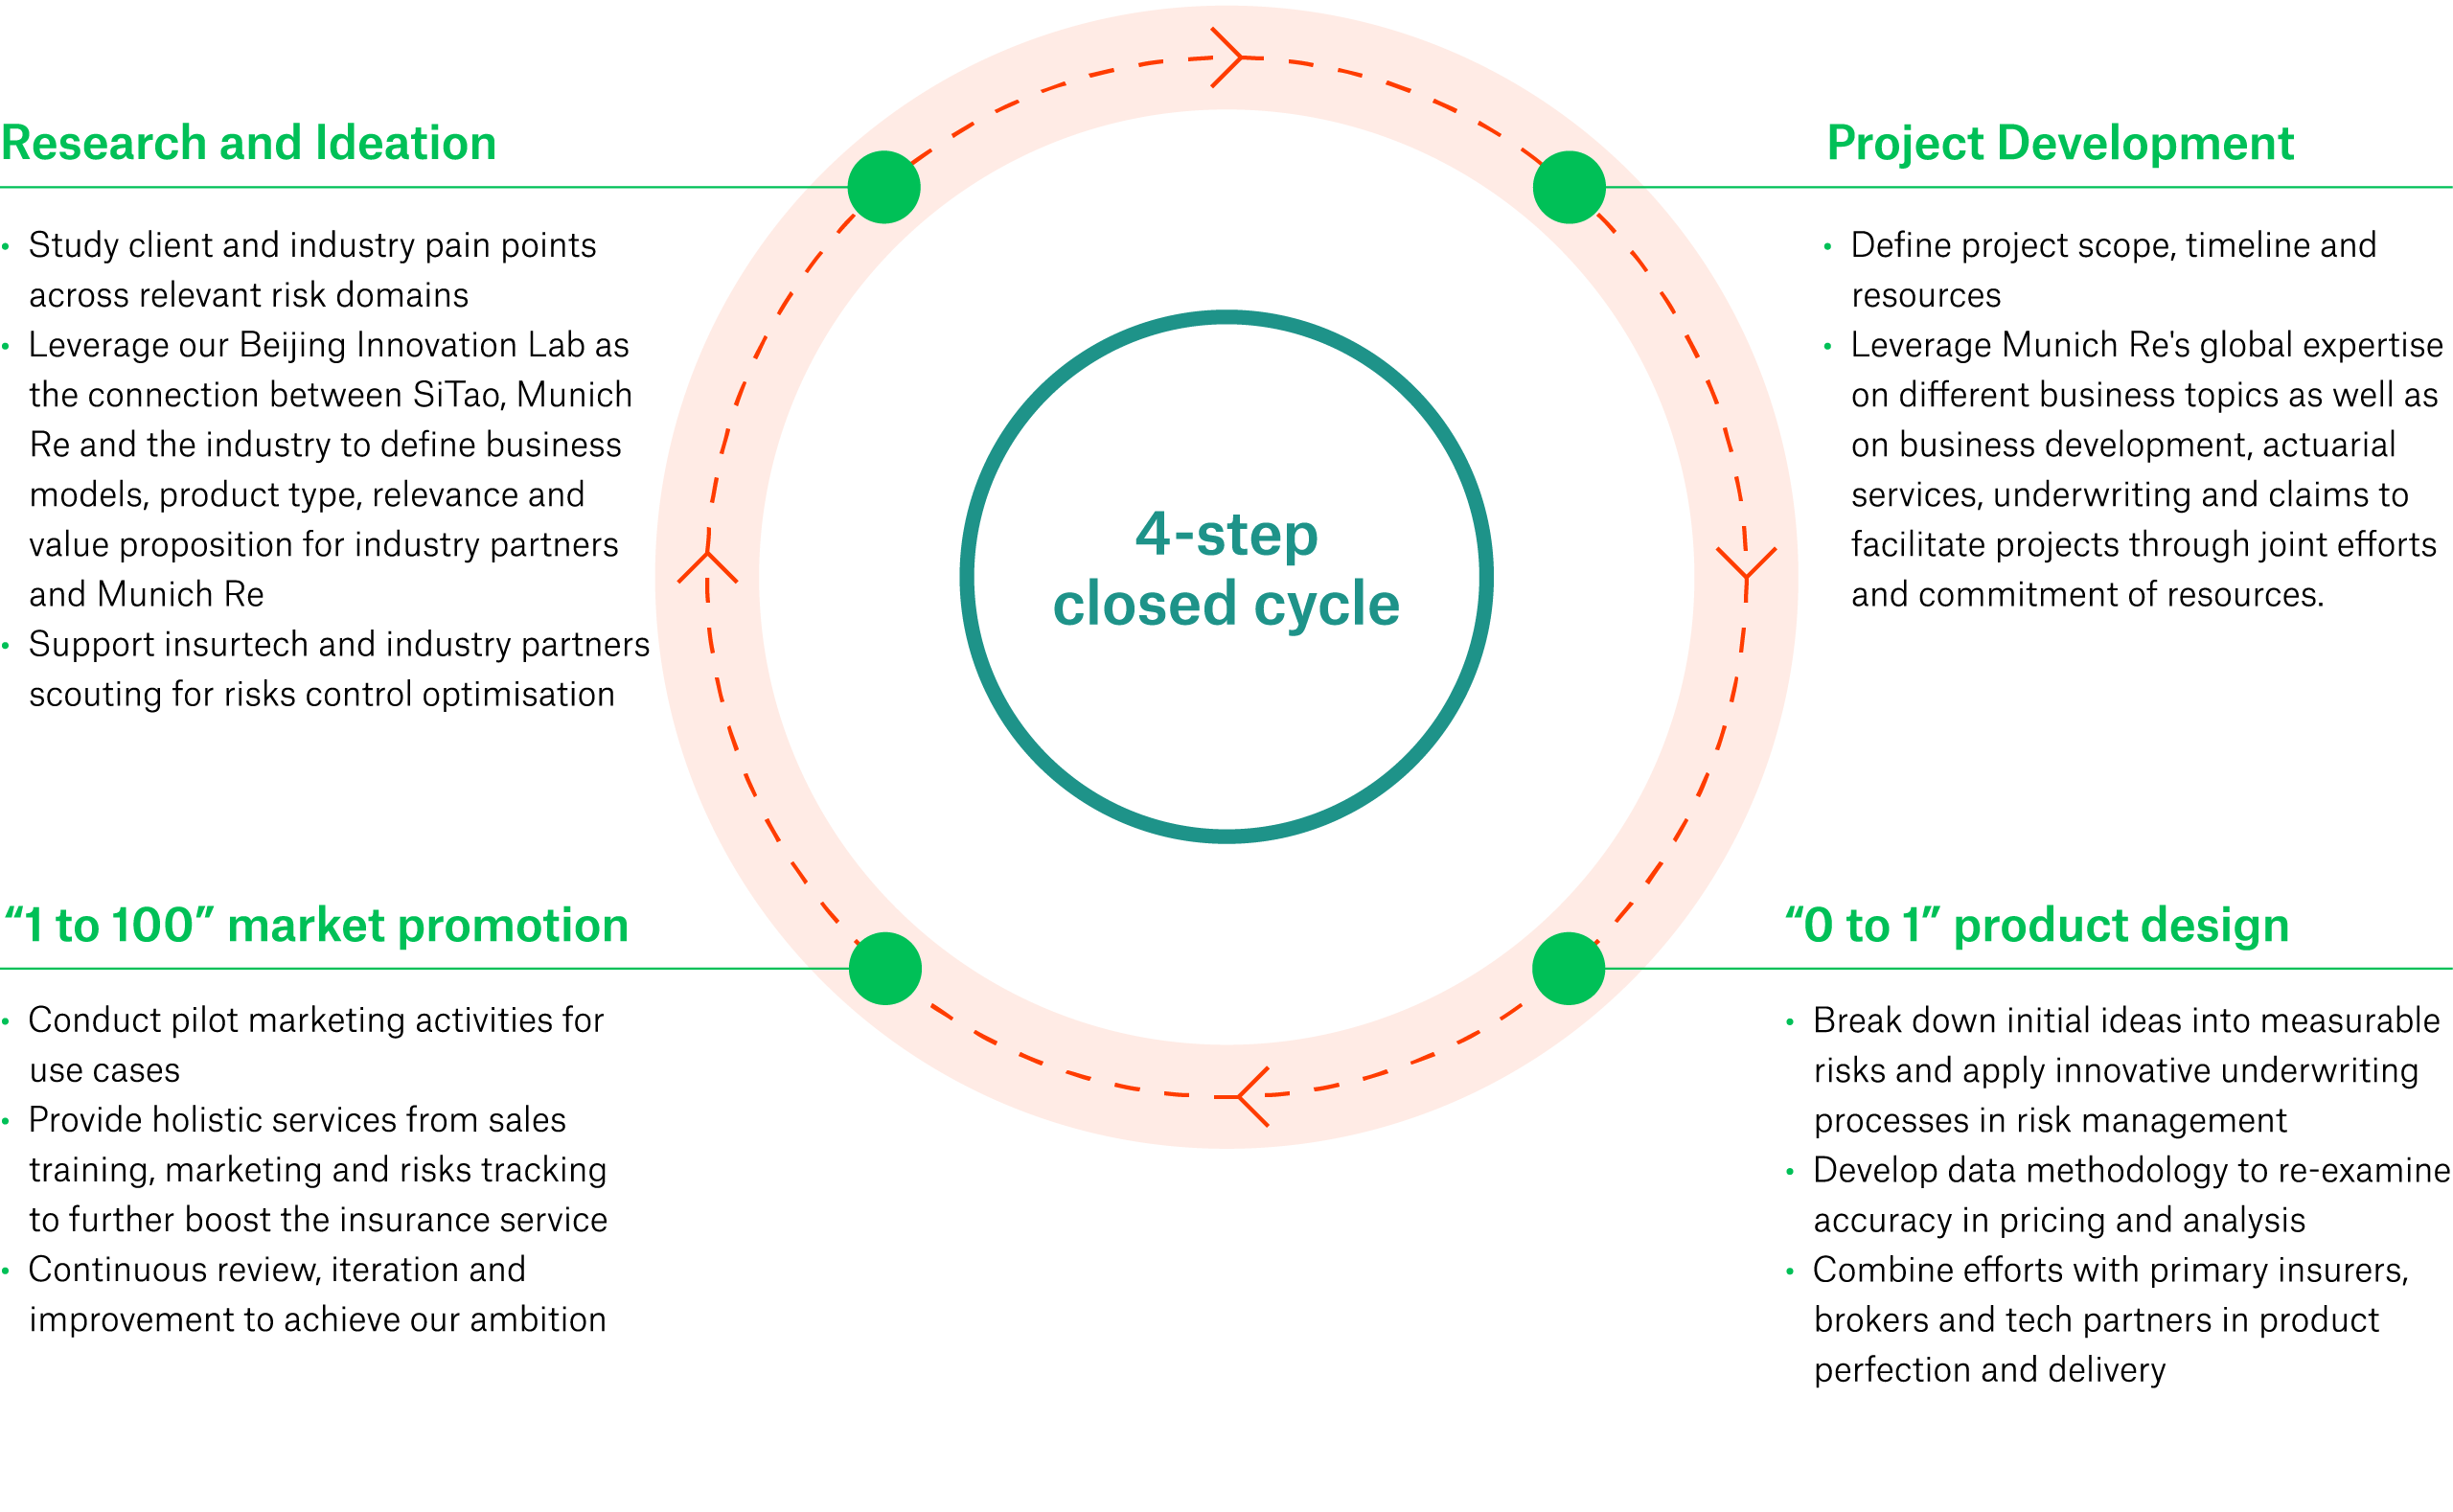 Our approach – a 4-step closed cycle to make future risks insurable - from reasearch to project development to market promotion and product design